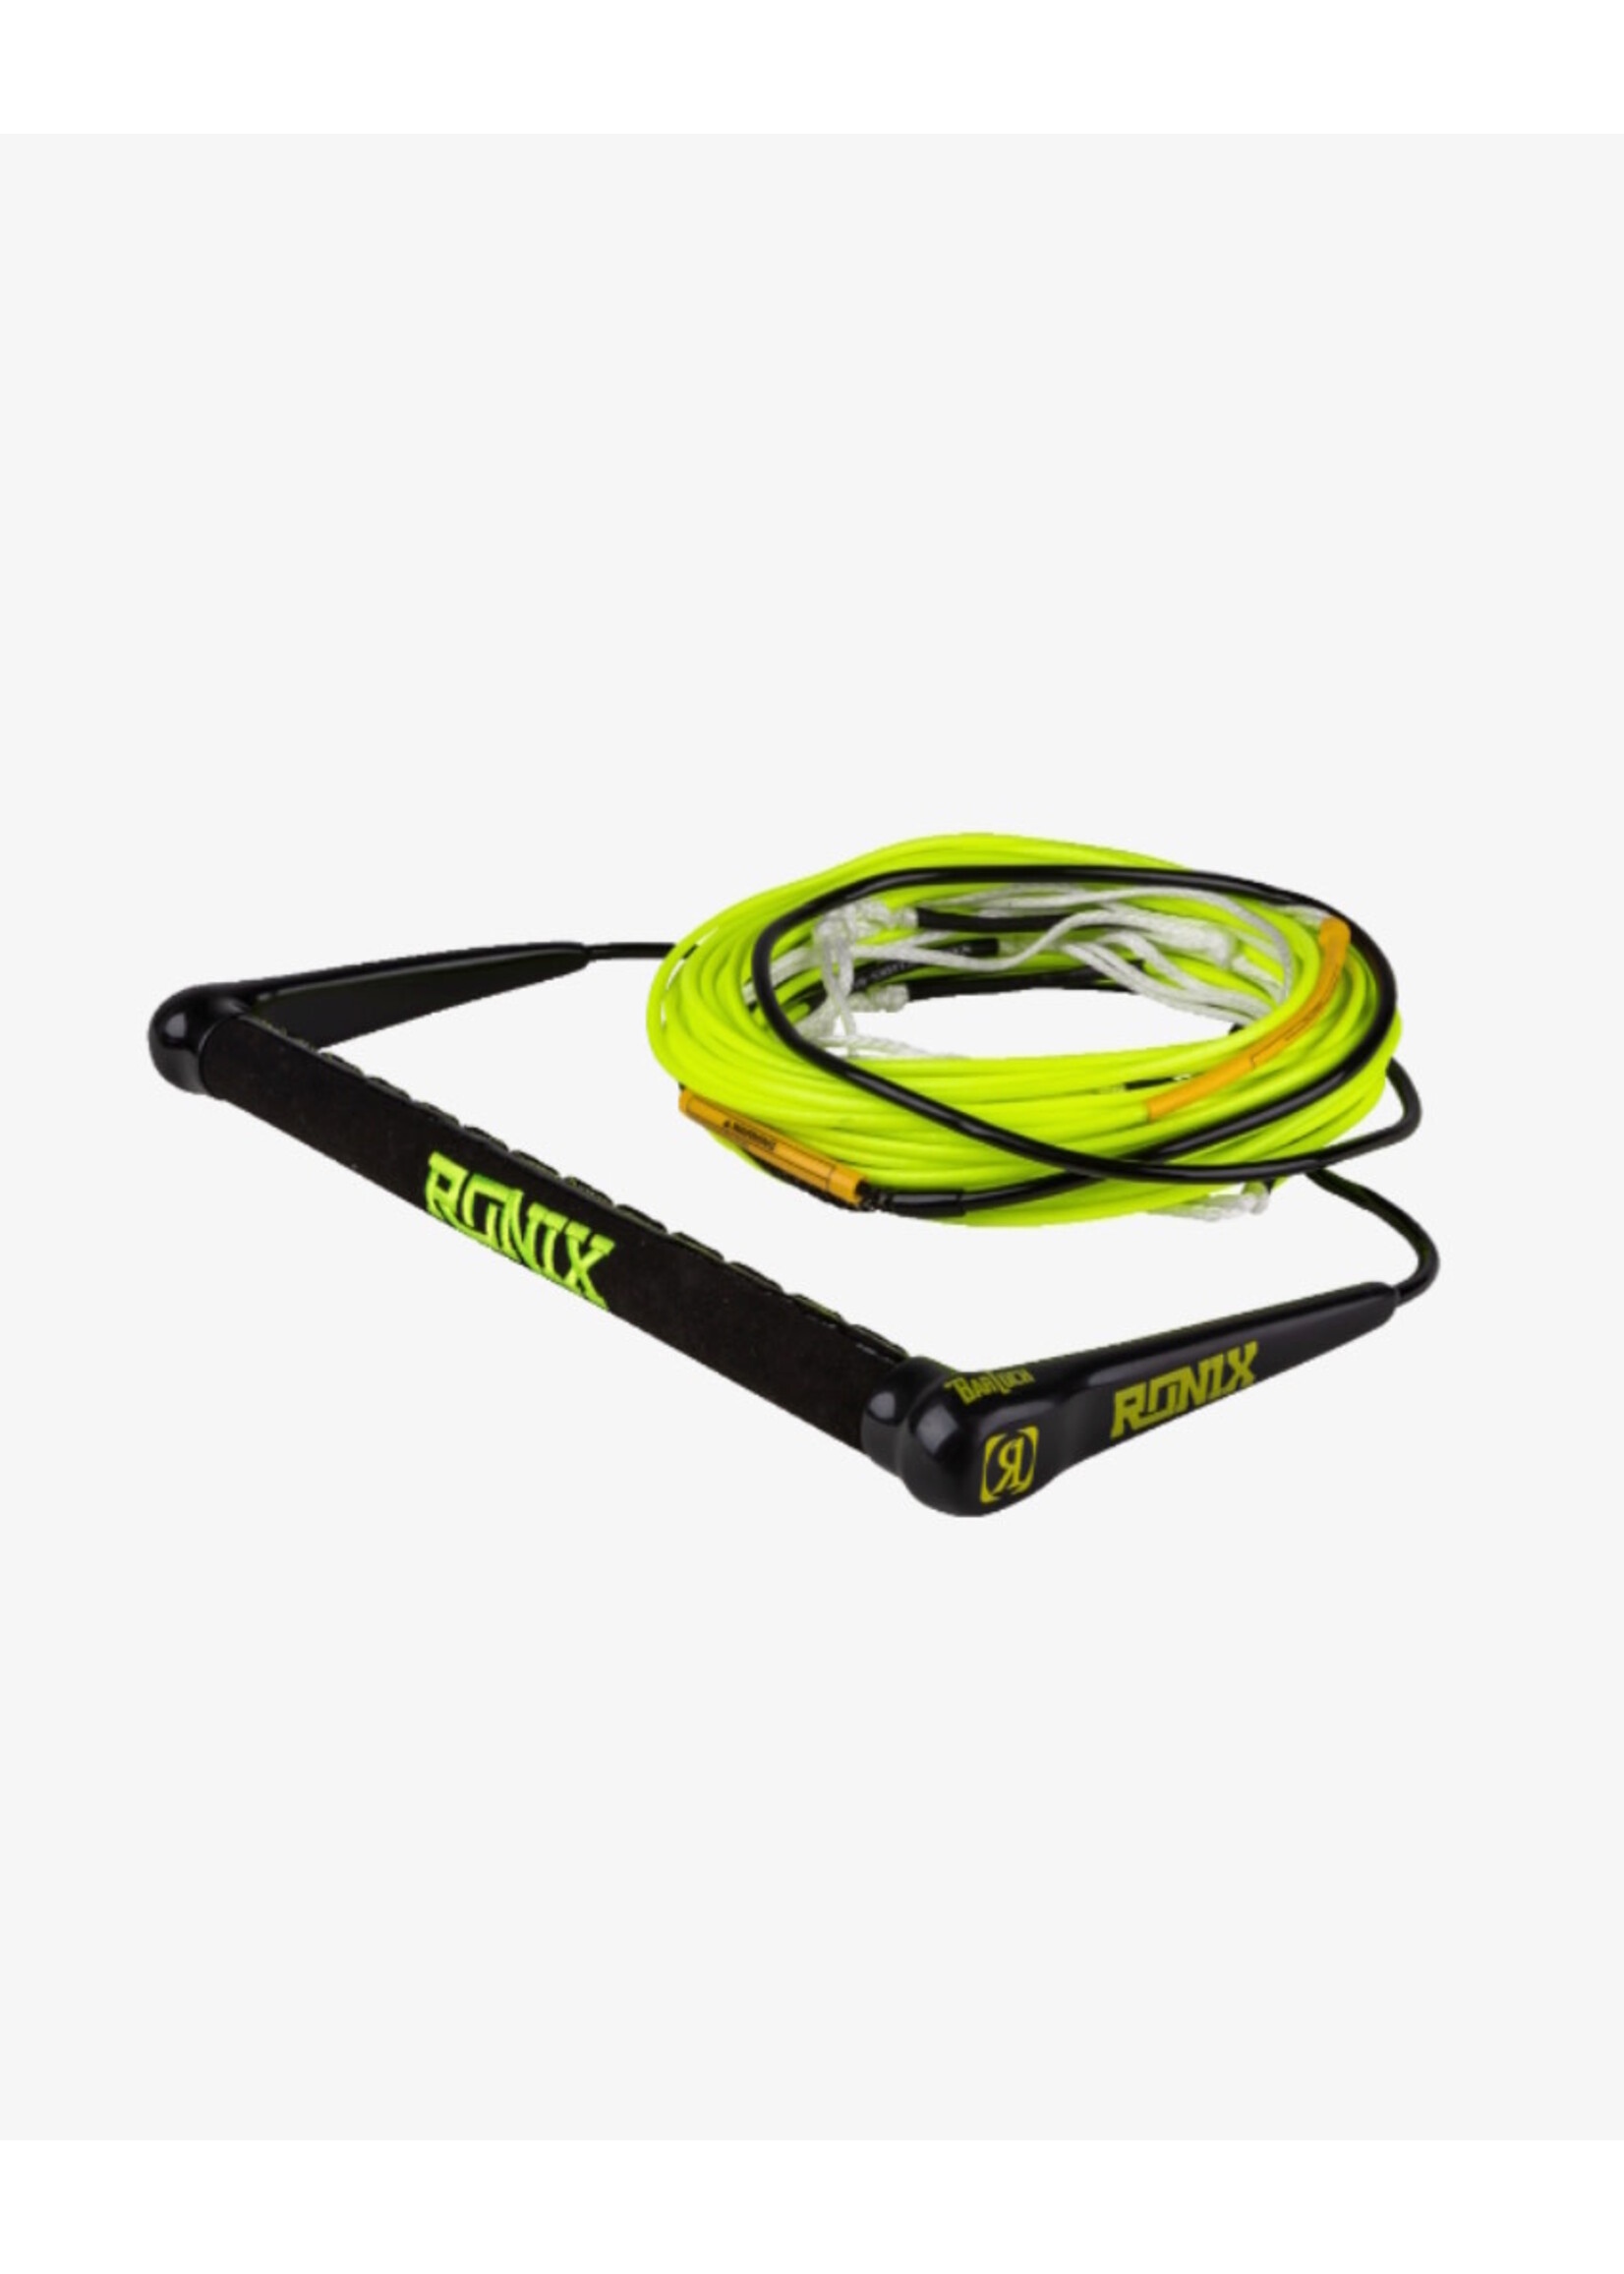 Ronix Combo 5.0 - Hide Grip 1.15 in. Dia. w/ 80ft. R6 Rope